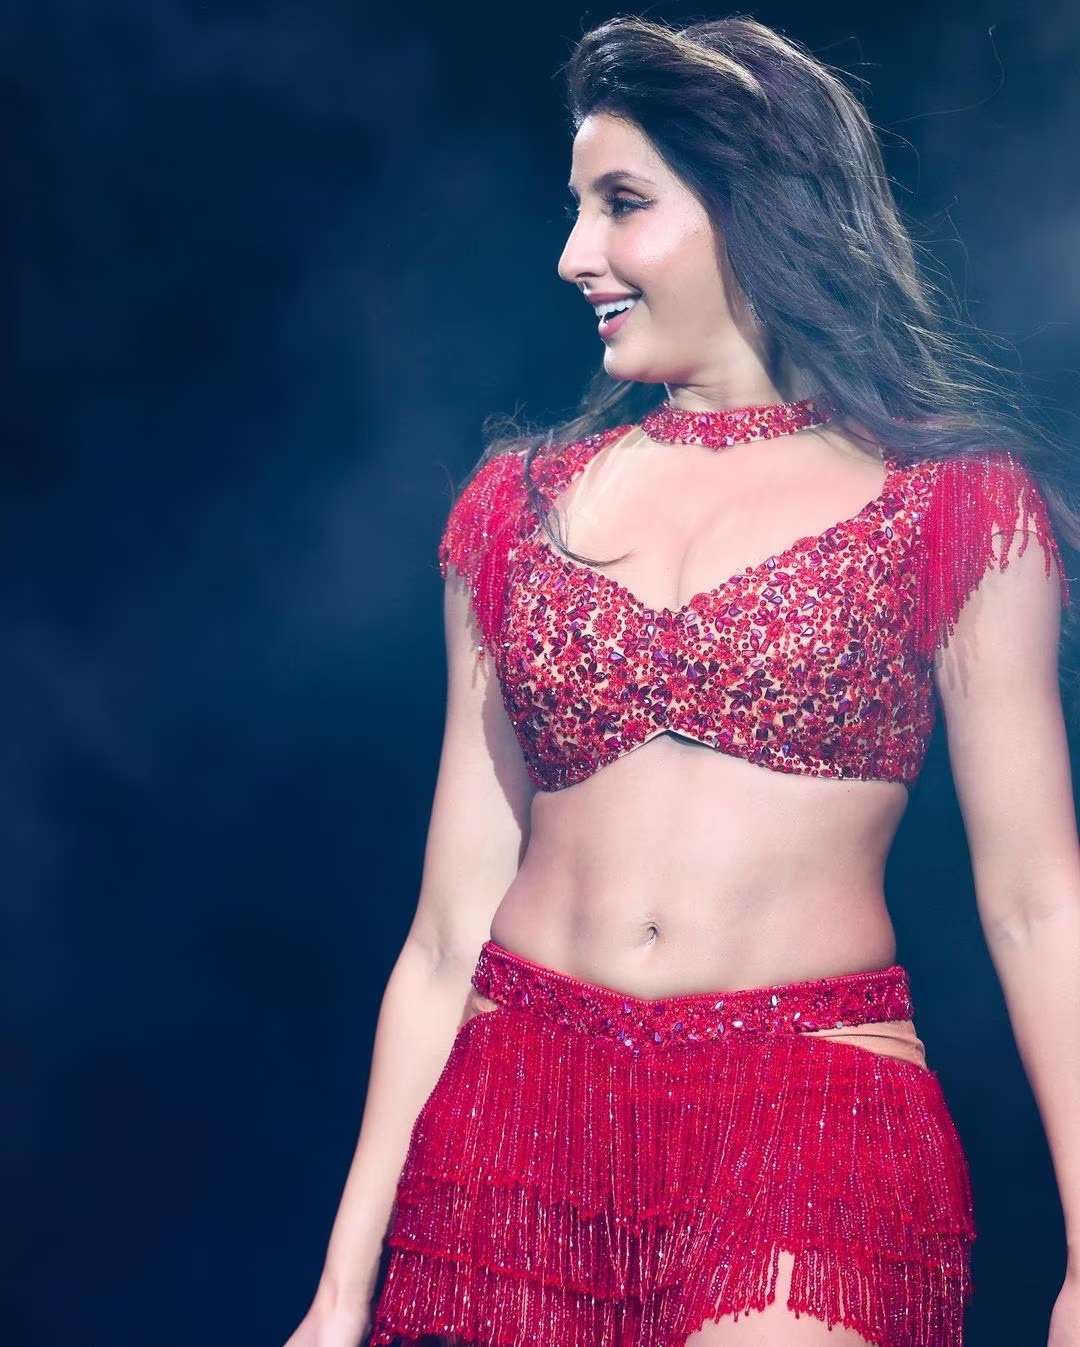 Nora Fatehi Nudes - Nora Fatehi gave a killer pose on the stage wearing a bralette top and a  short skirt, bo*ld pictures went viral - informalnewz